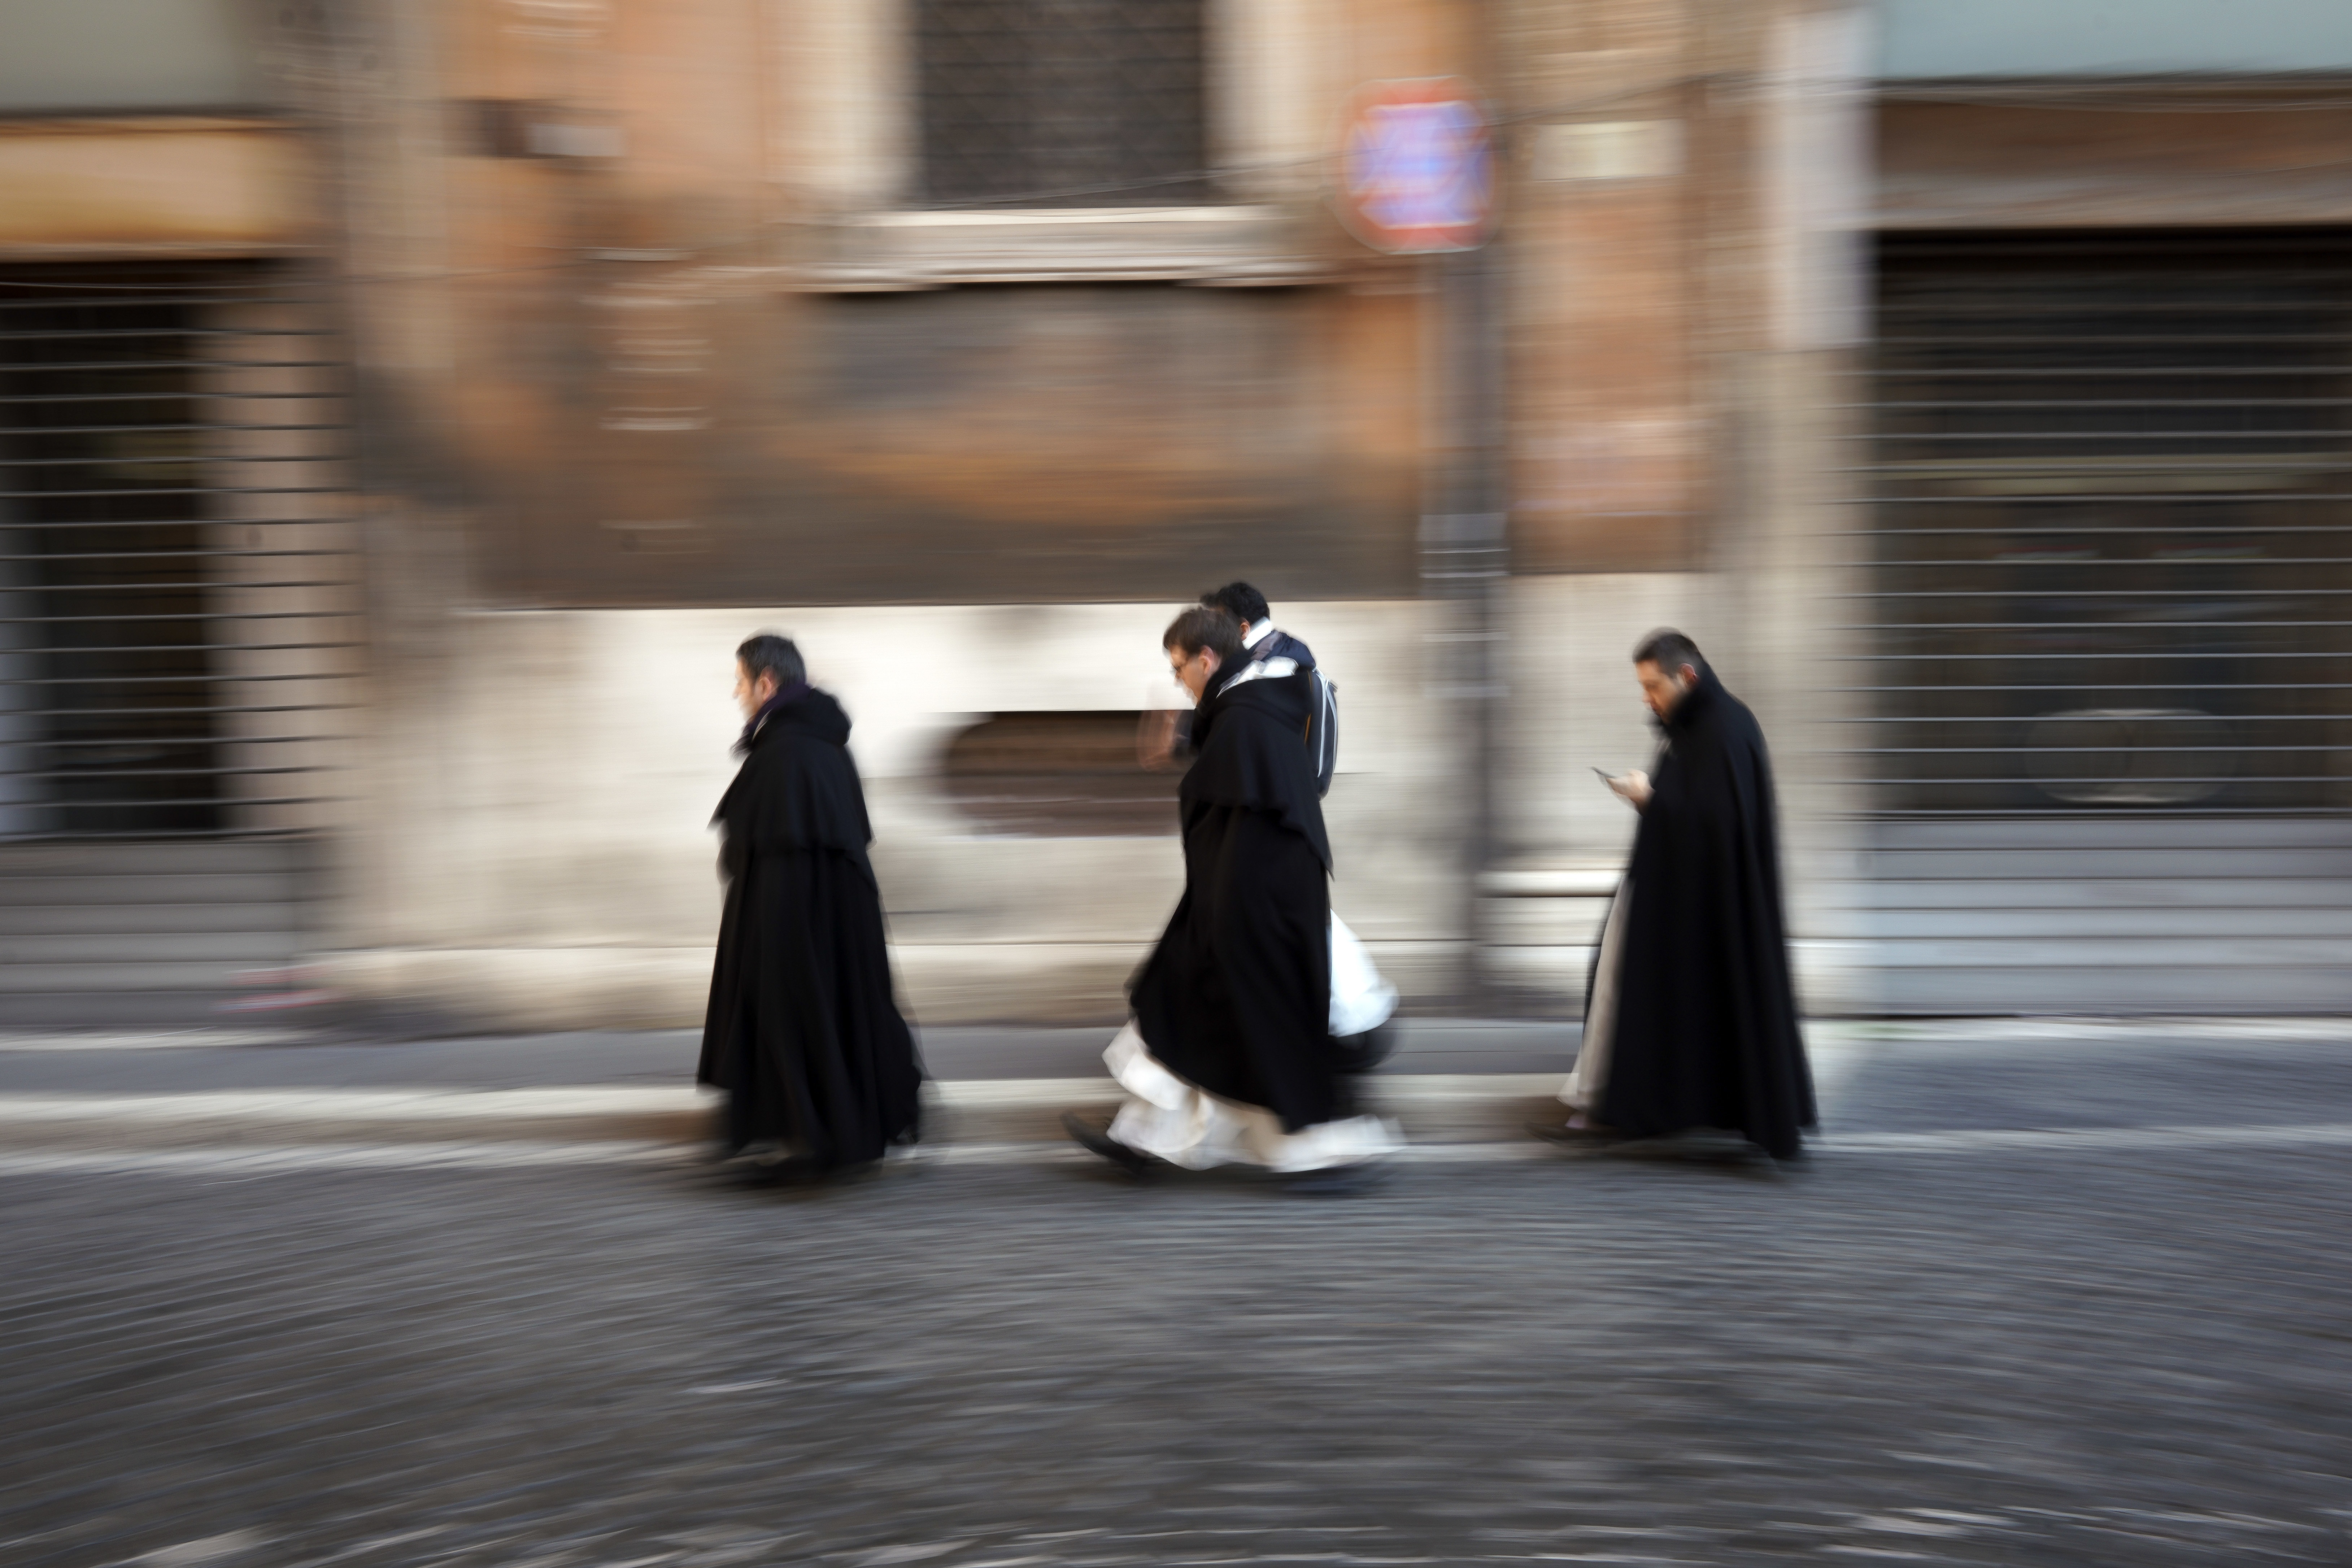 Priests walk in a street in downtown Rome, Monday, Jan. 7, 2019. (AP Photo/Andrew Medichini)